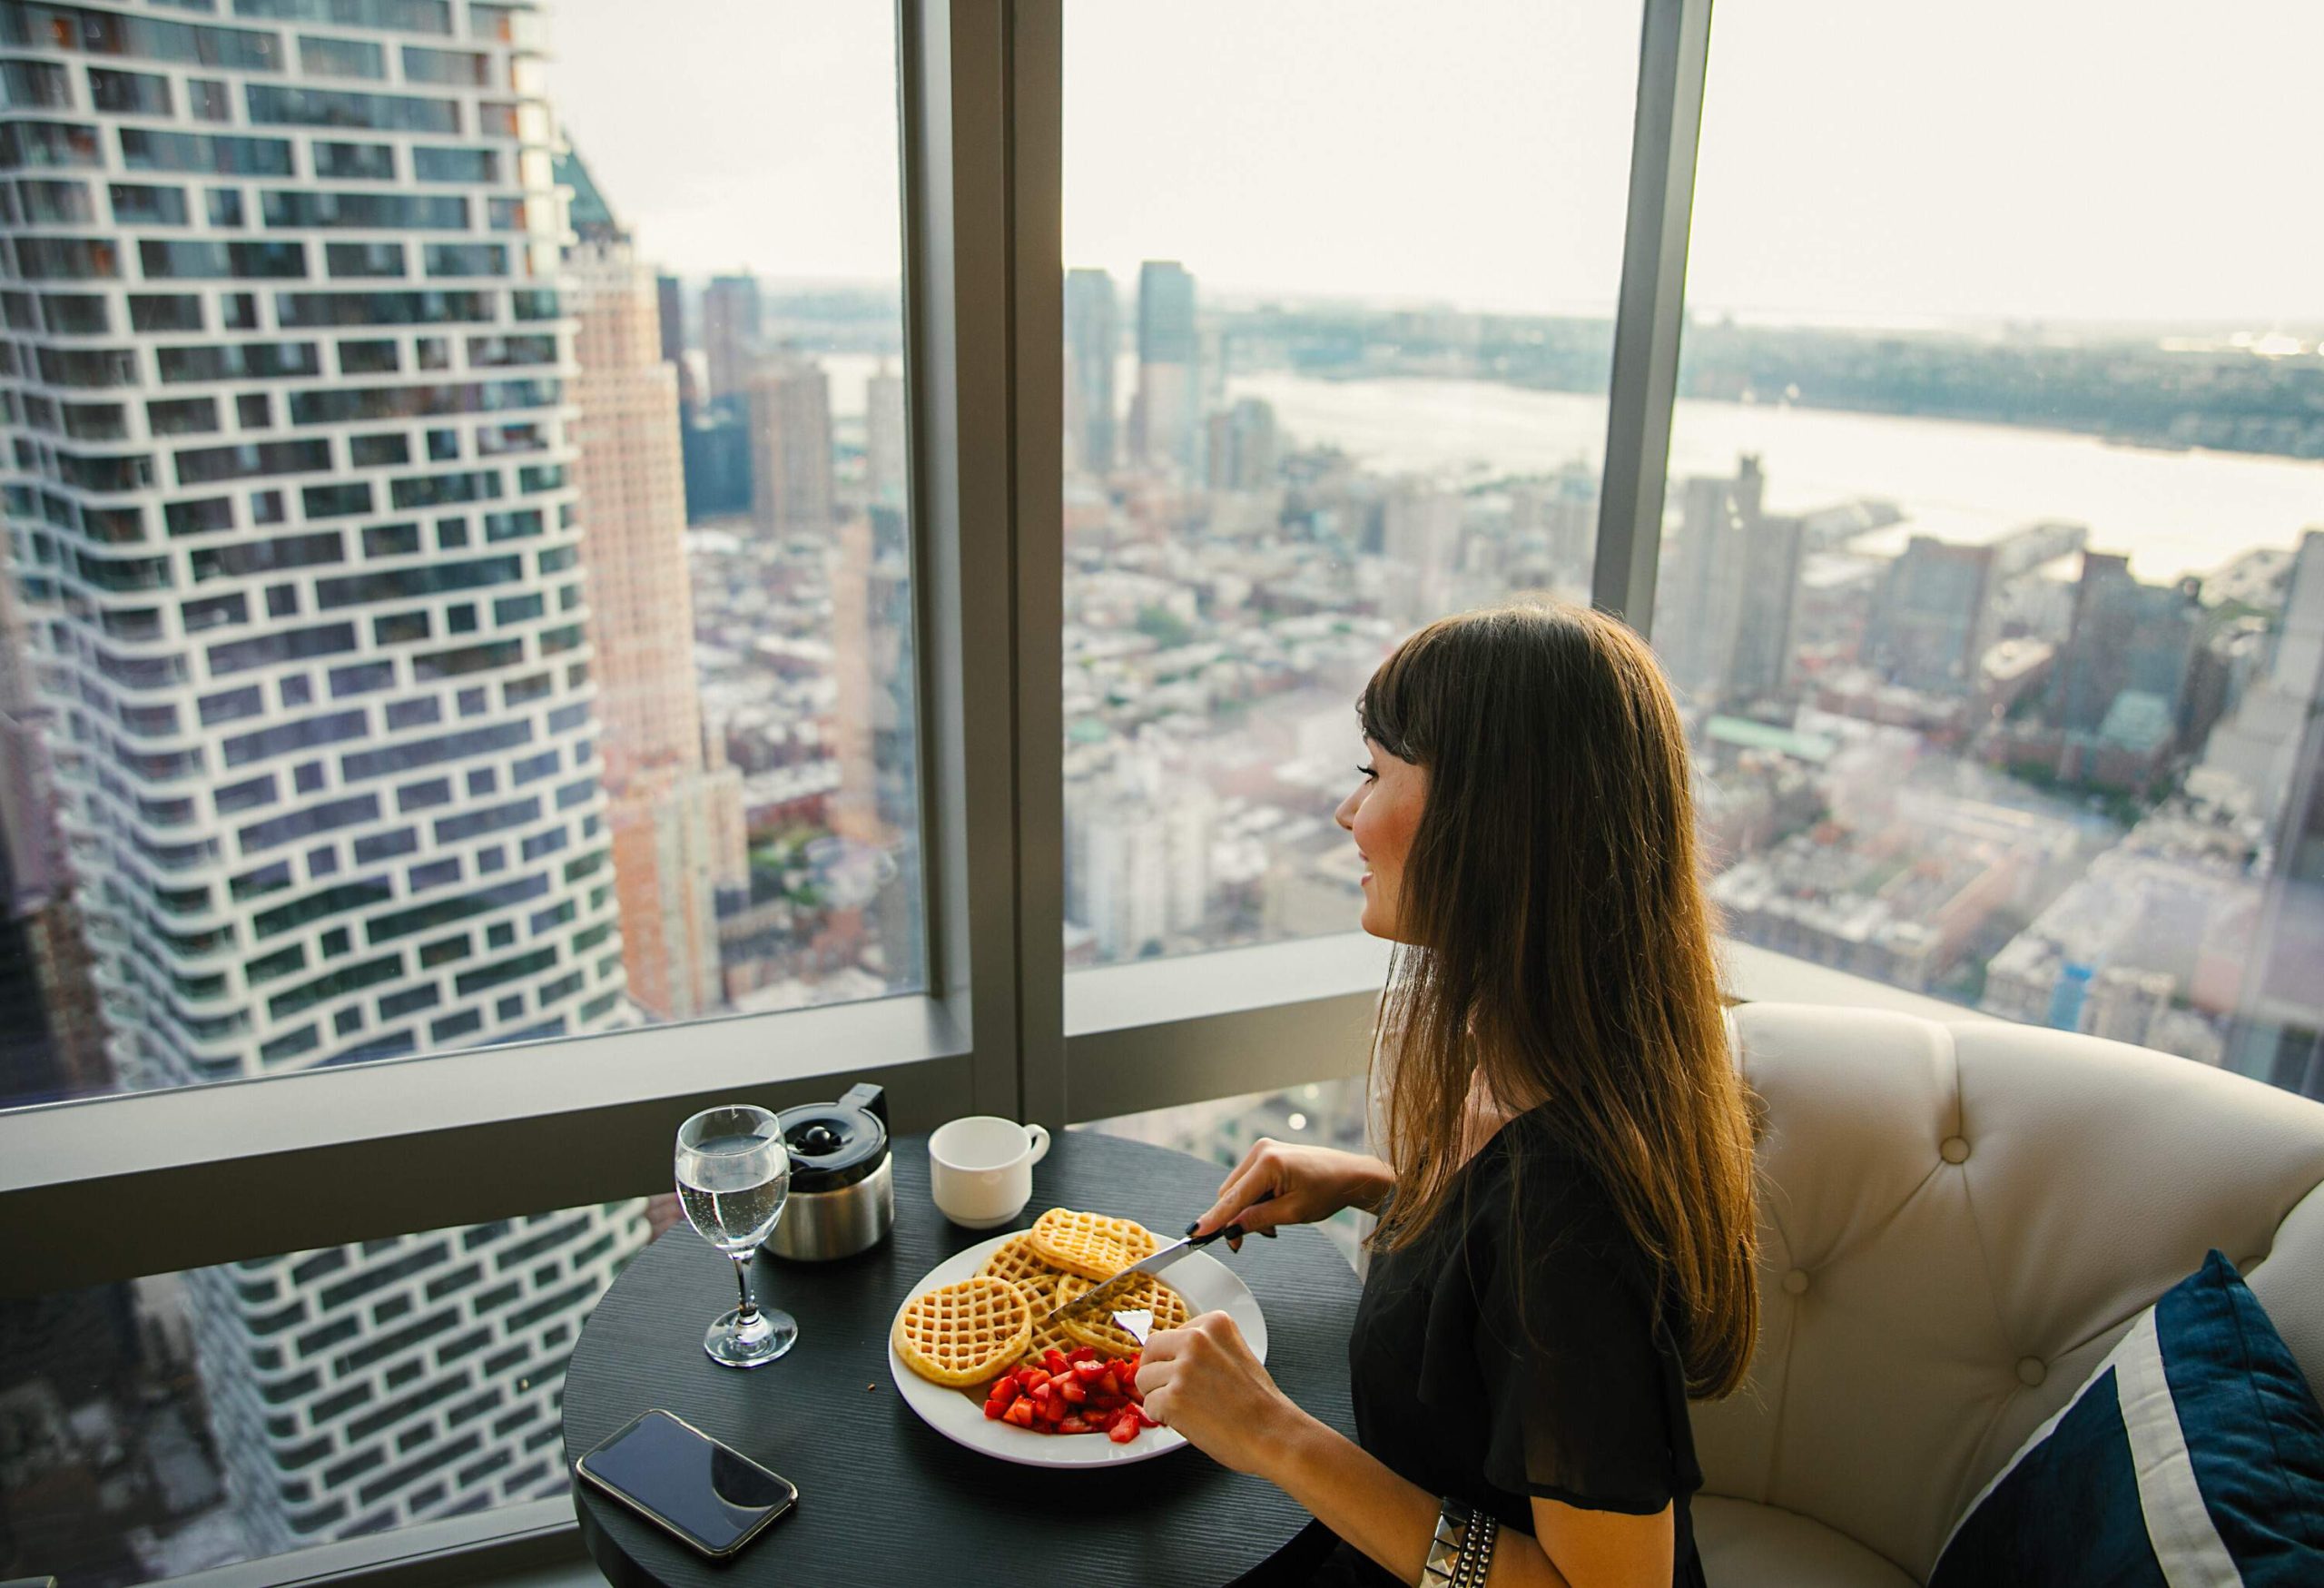 A woman eating waffles and strawberries at a table while she looks out over the city through the glass windows.